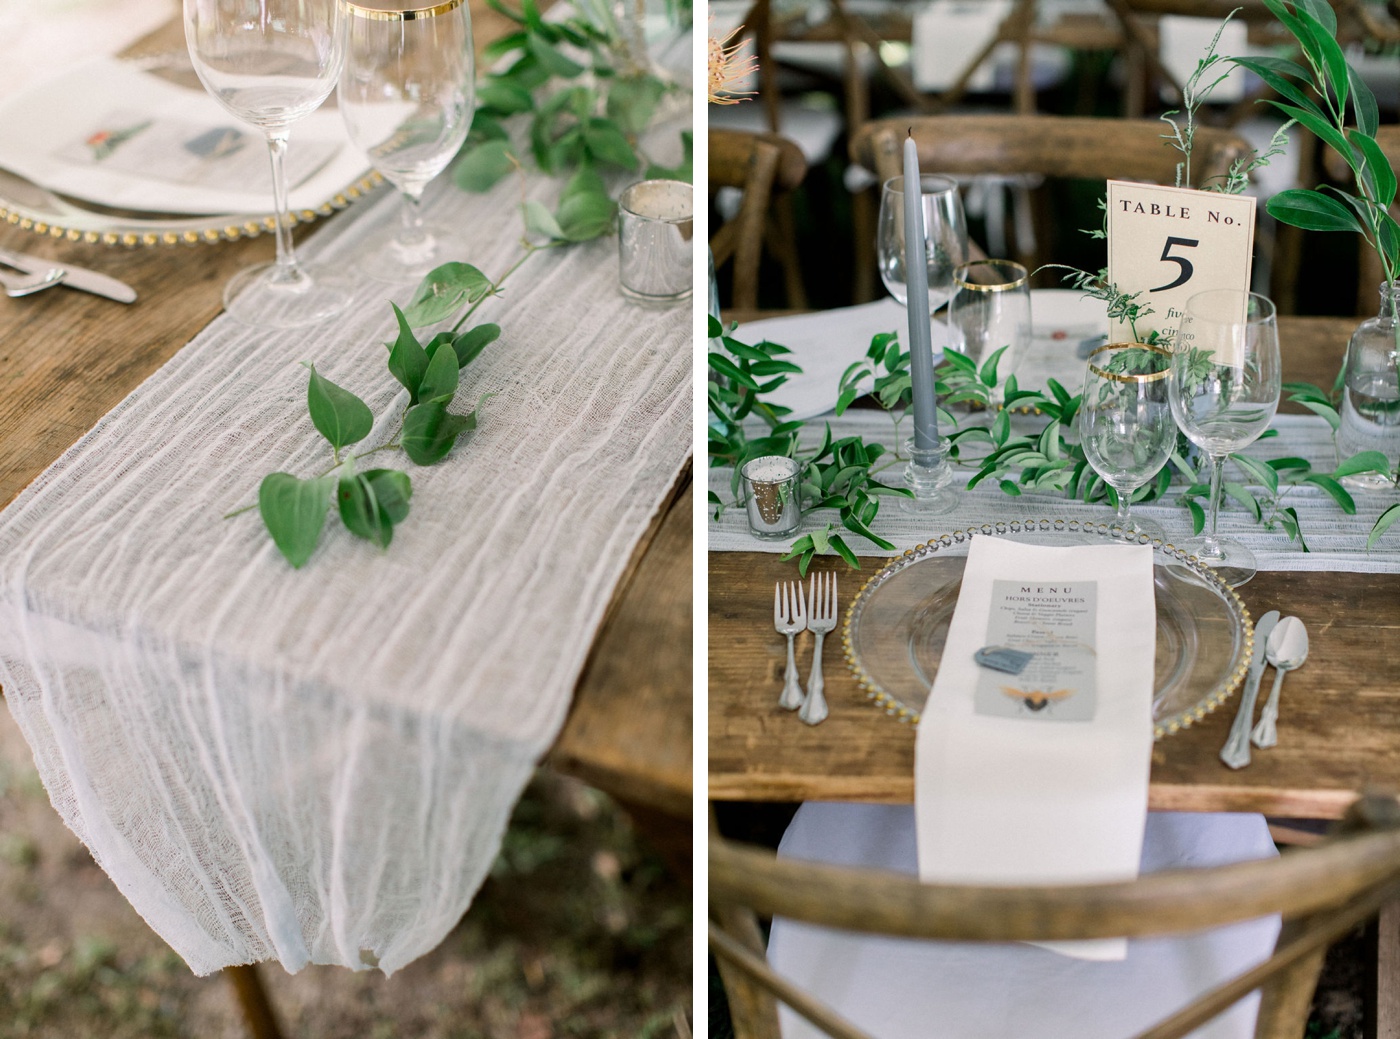 White gauze table runners, blue taper candles, and greenery for a tropical-inspired wedding reception